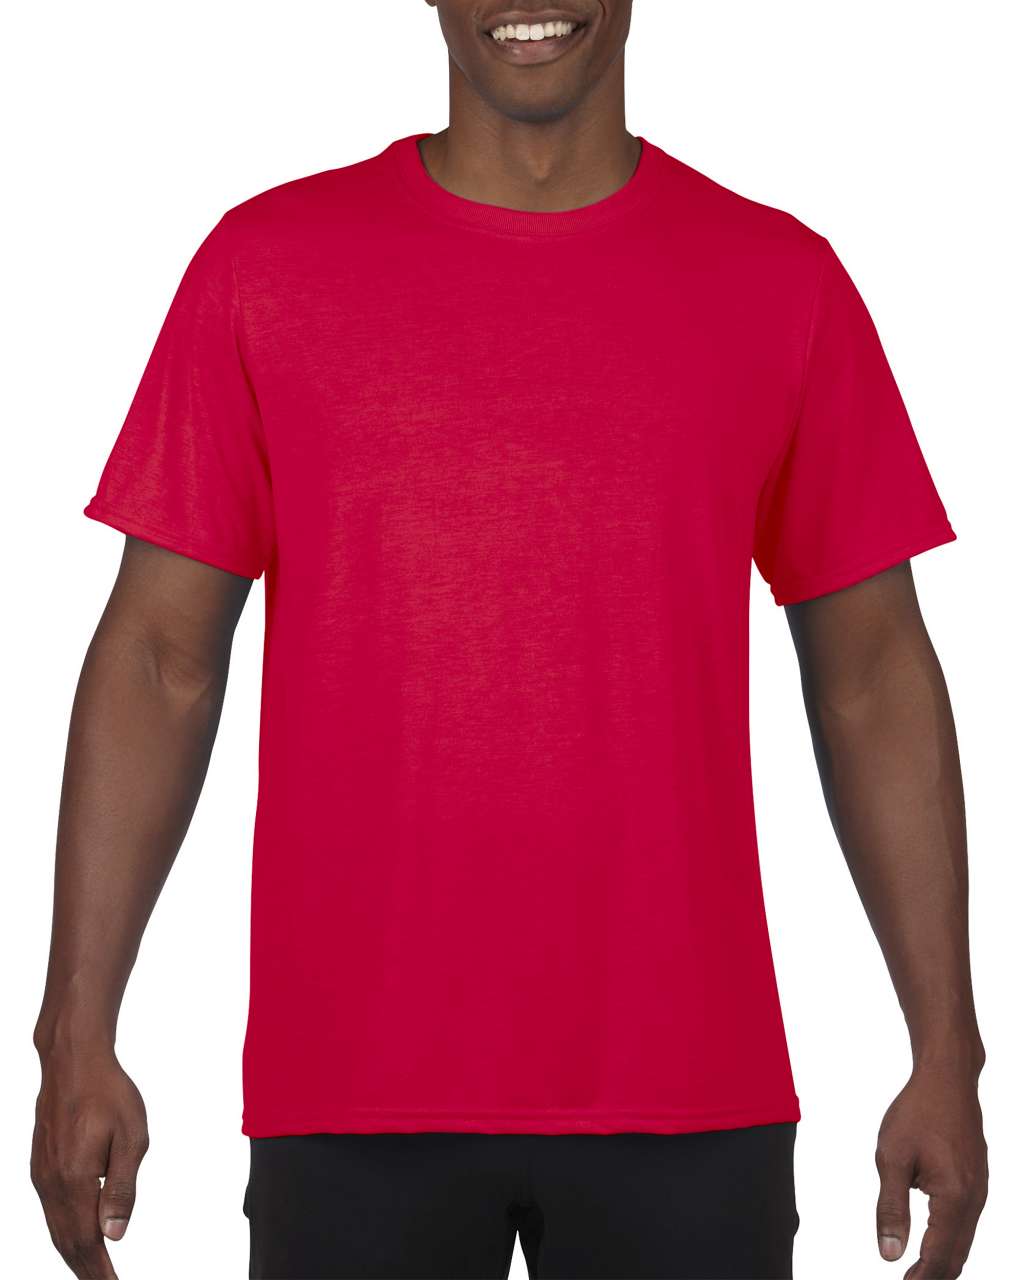 Promo  PERFORMANCE<SUP>®</SUP> ADULT CORE T-SHIRT